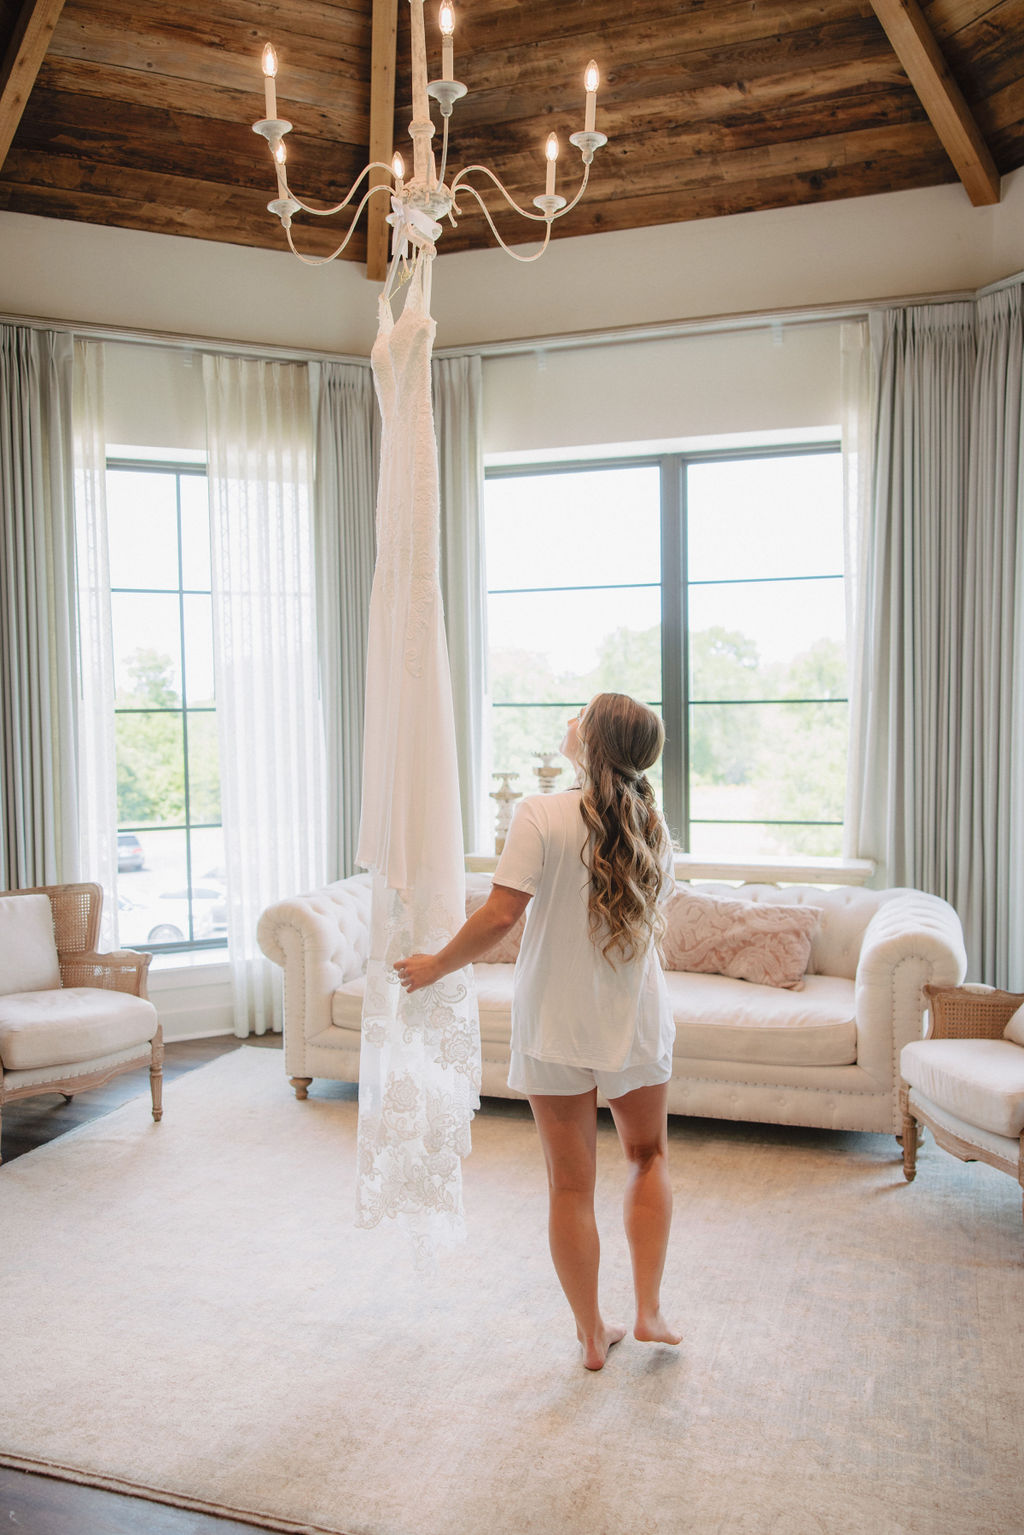 A white wedding dress hangs from a chandelier in a room with a wooden beam ceiling, large windows, and light-colored furniture.